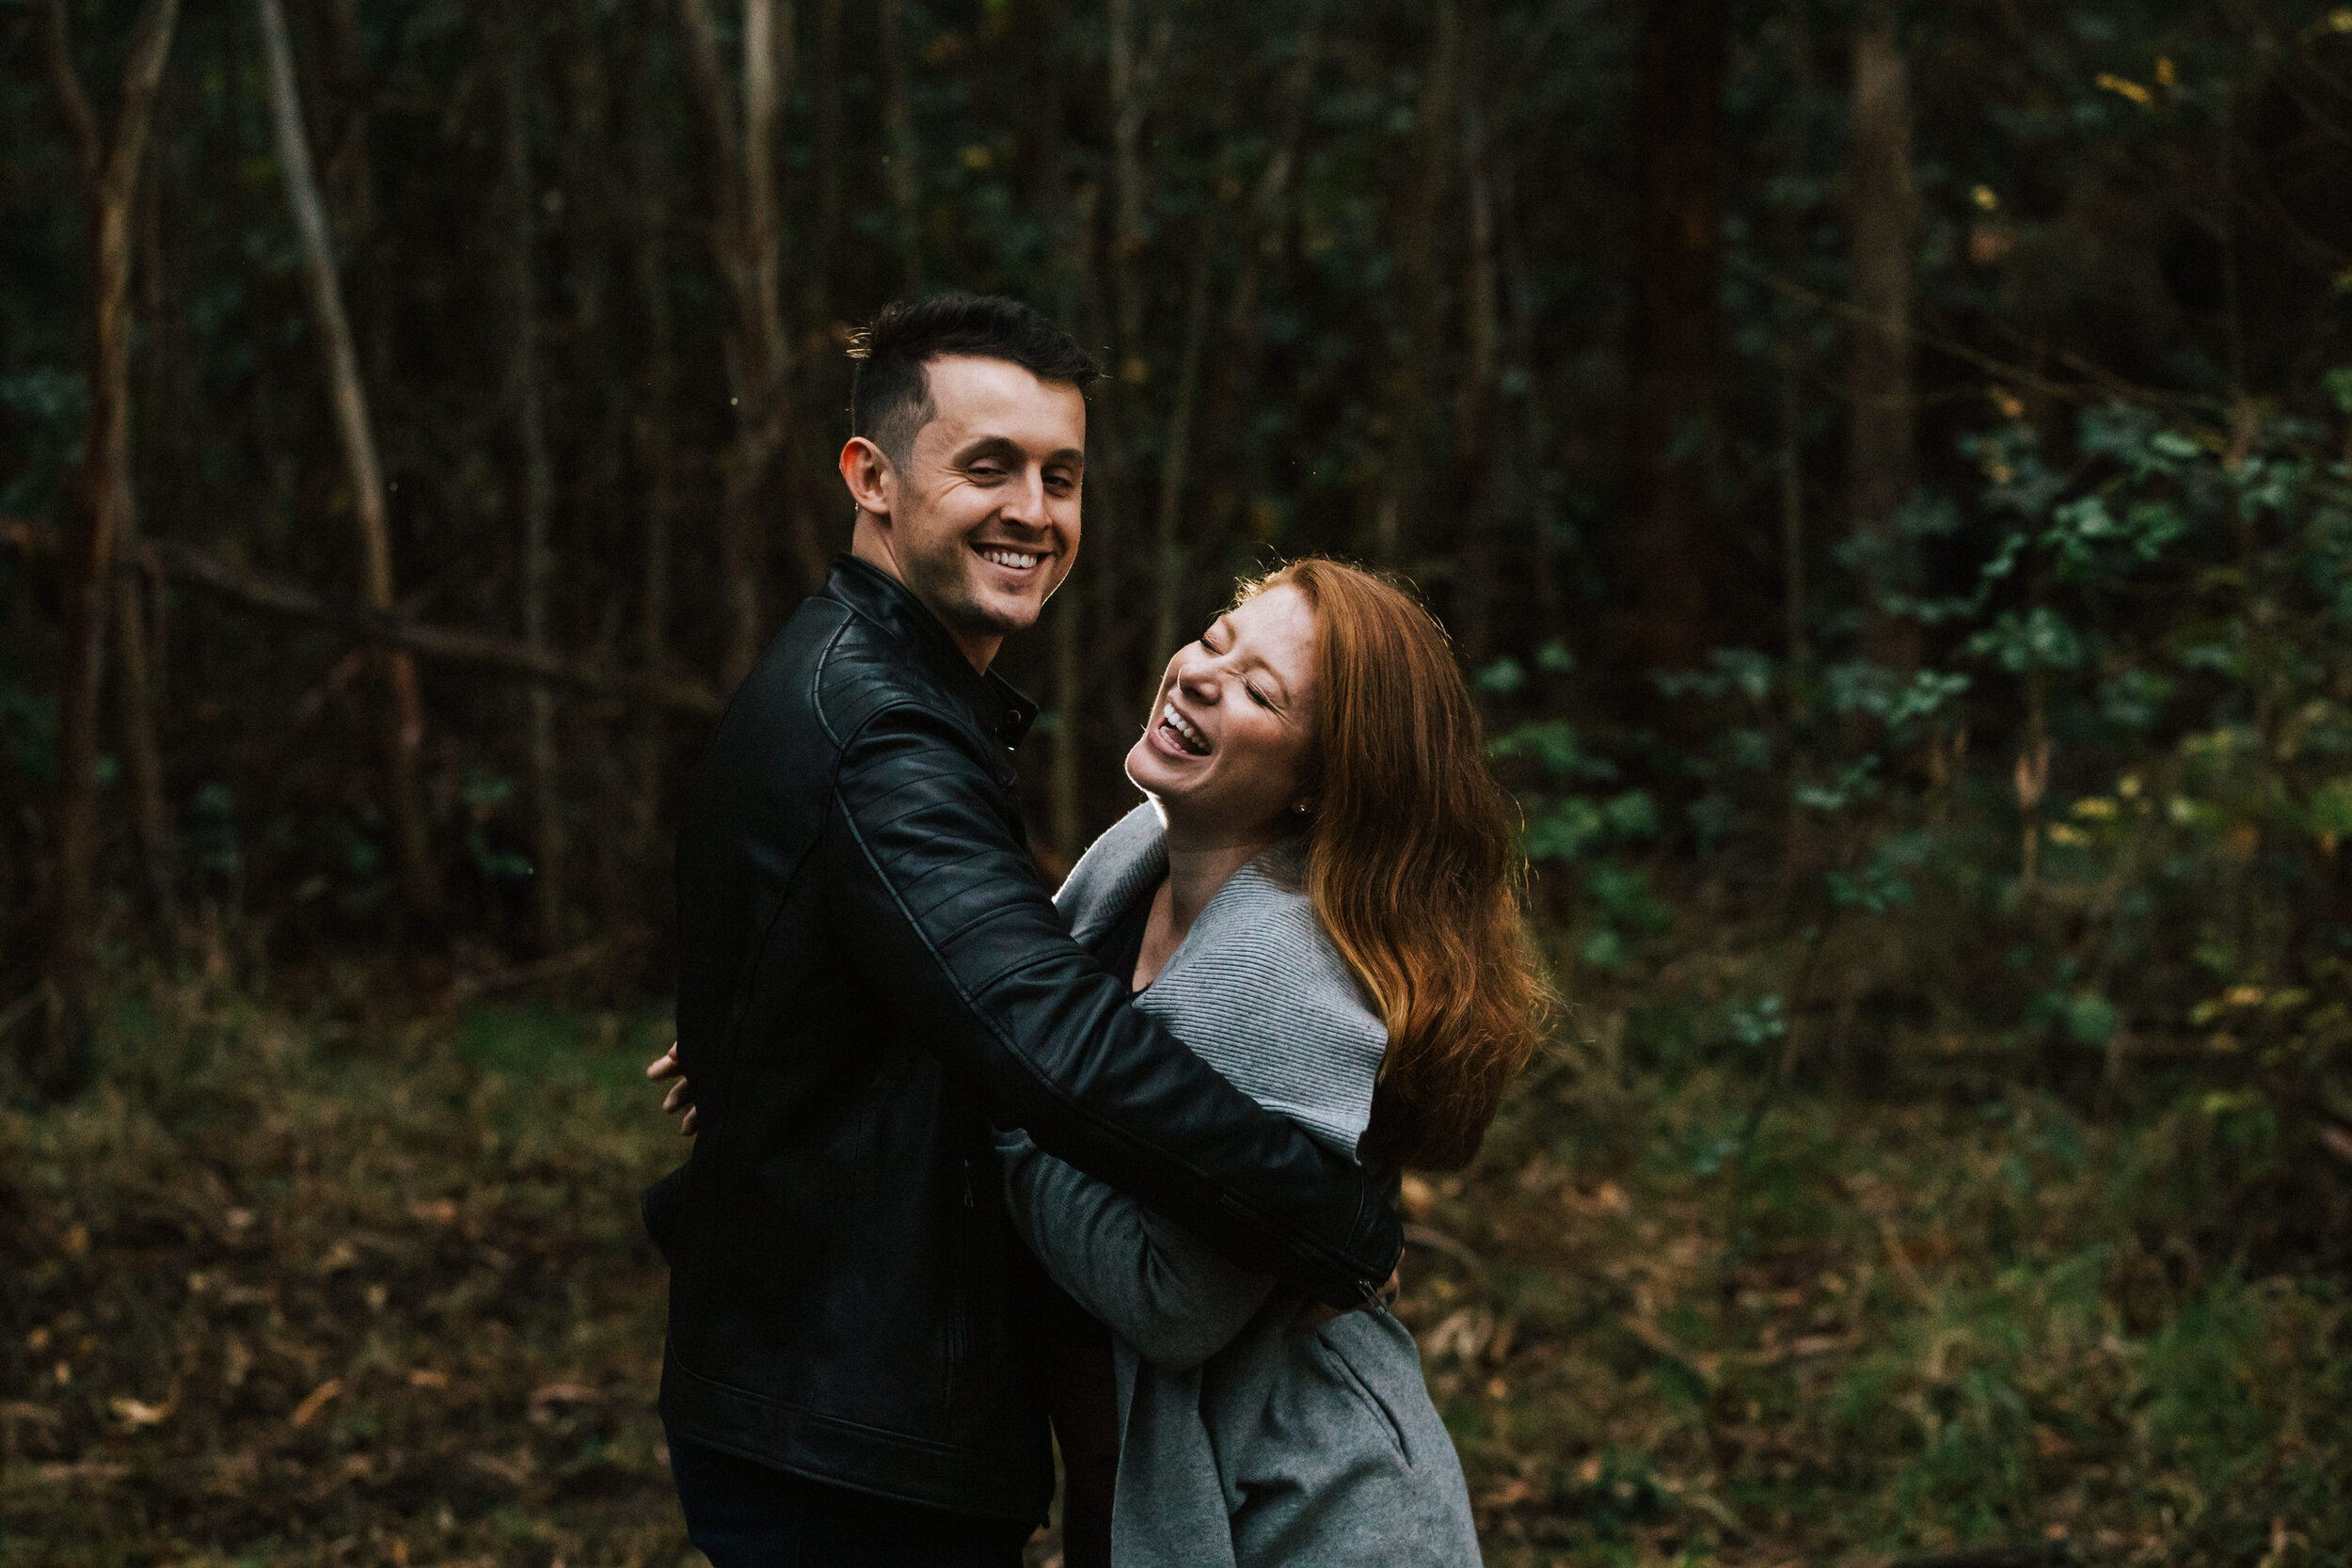 Wintery Autumn Adelaide Hills Engagement Session 24.JPG